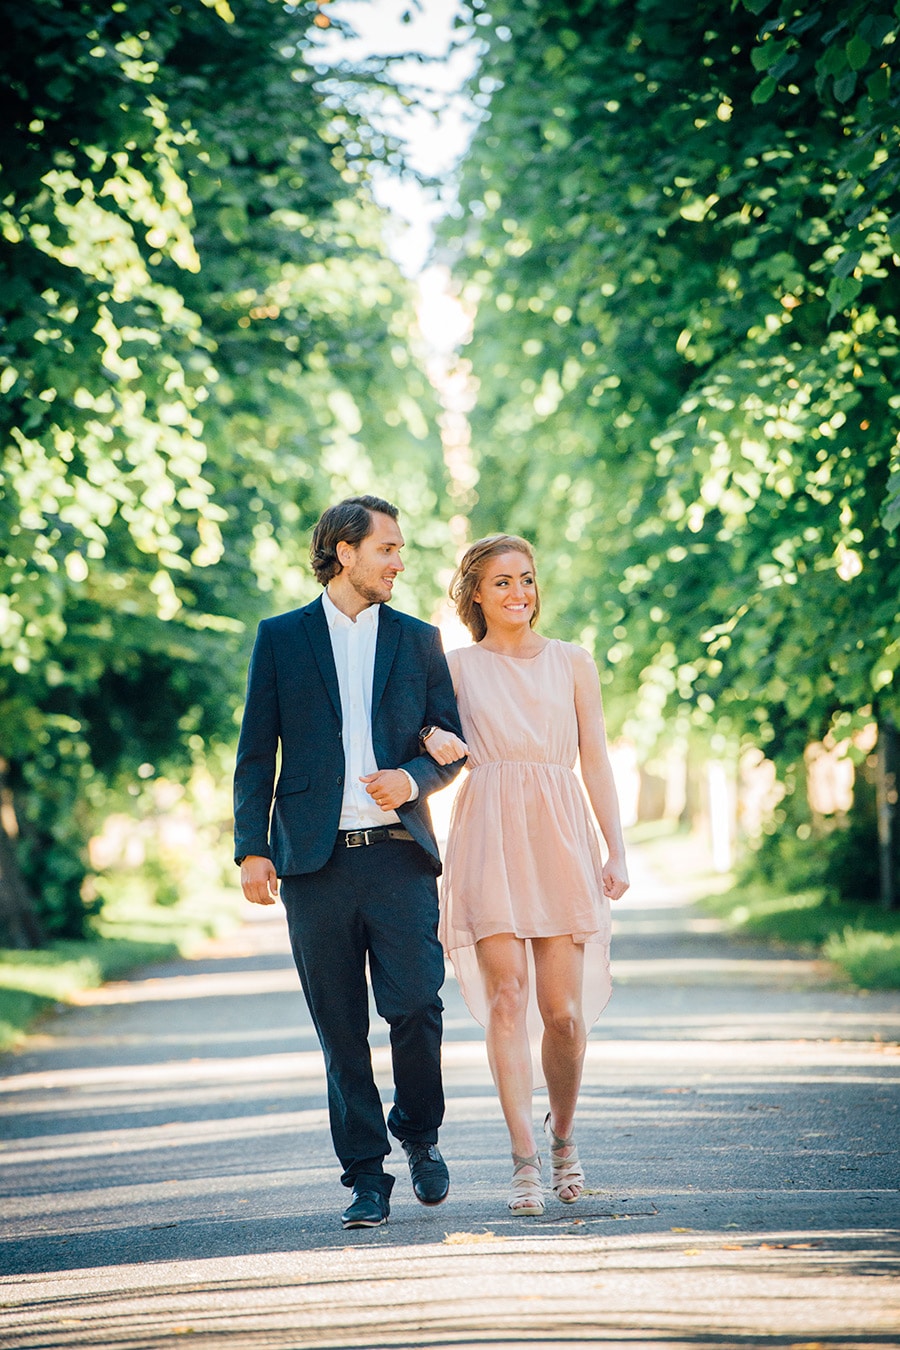 Couple photographed in avenue with trees. Pre wedding beloved session.